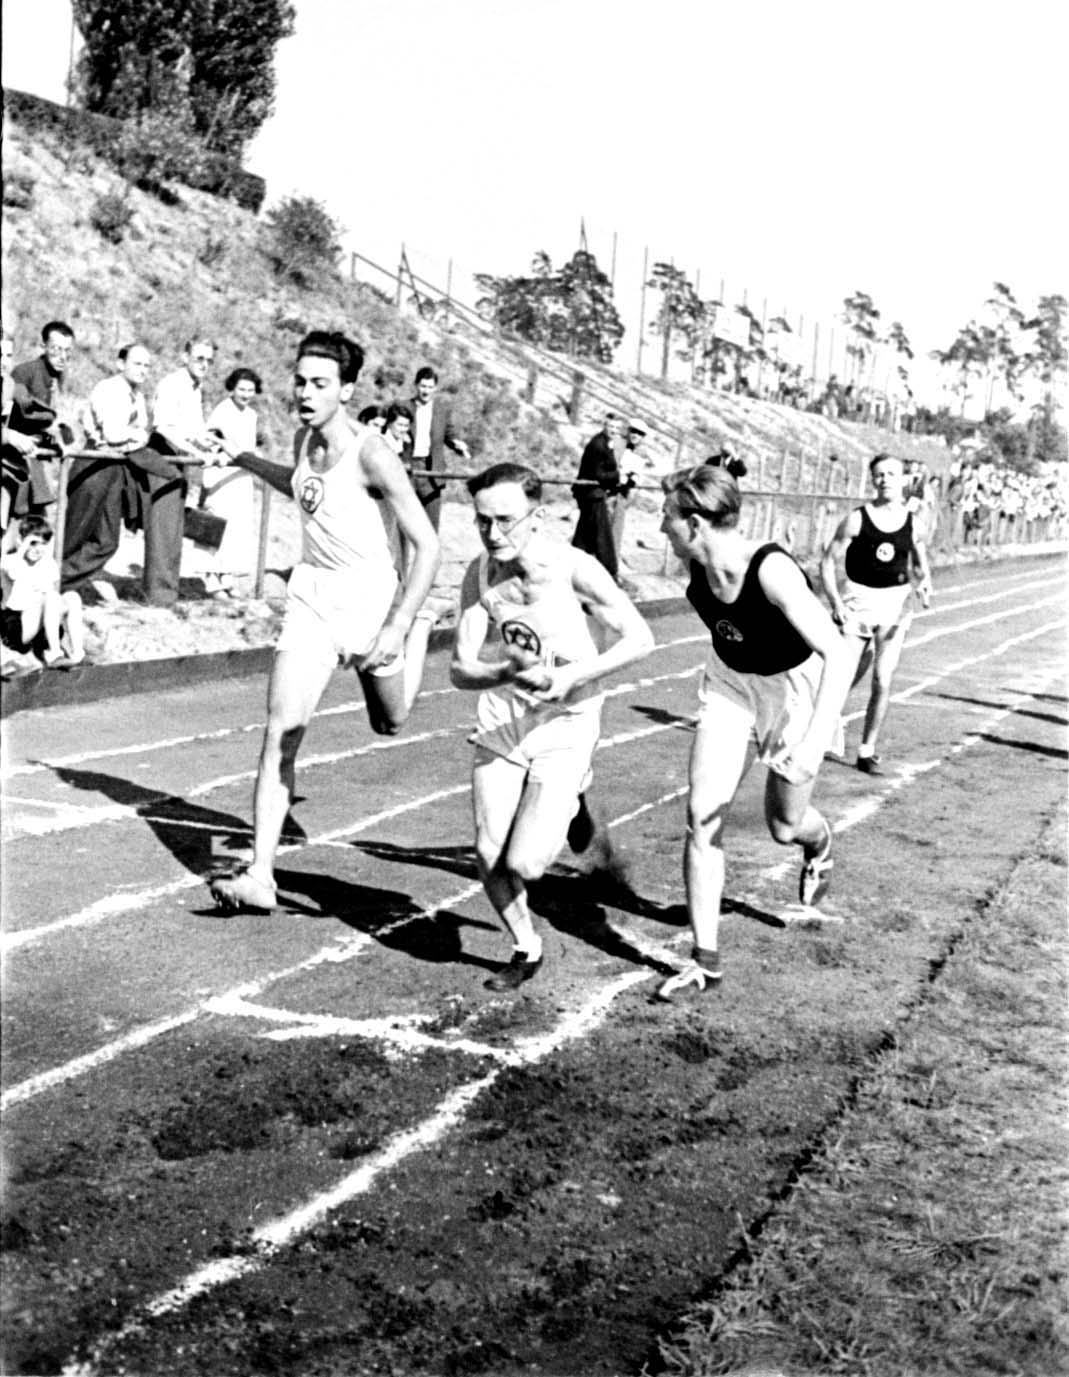 Berlin, Germany, 16/6/1935, a track competition at the Maccabi Berlin International Sports Day